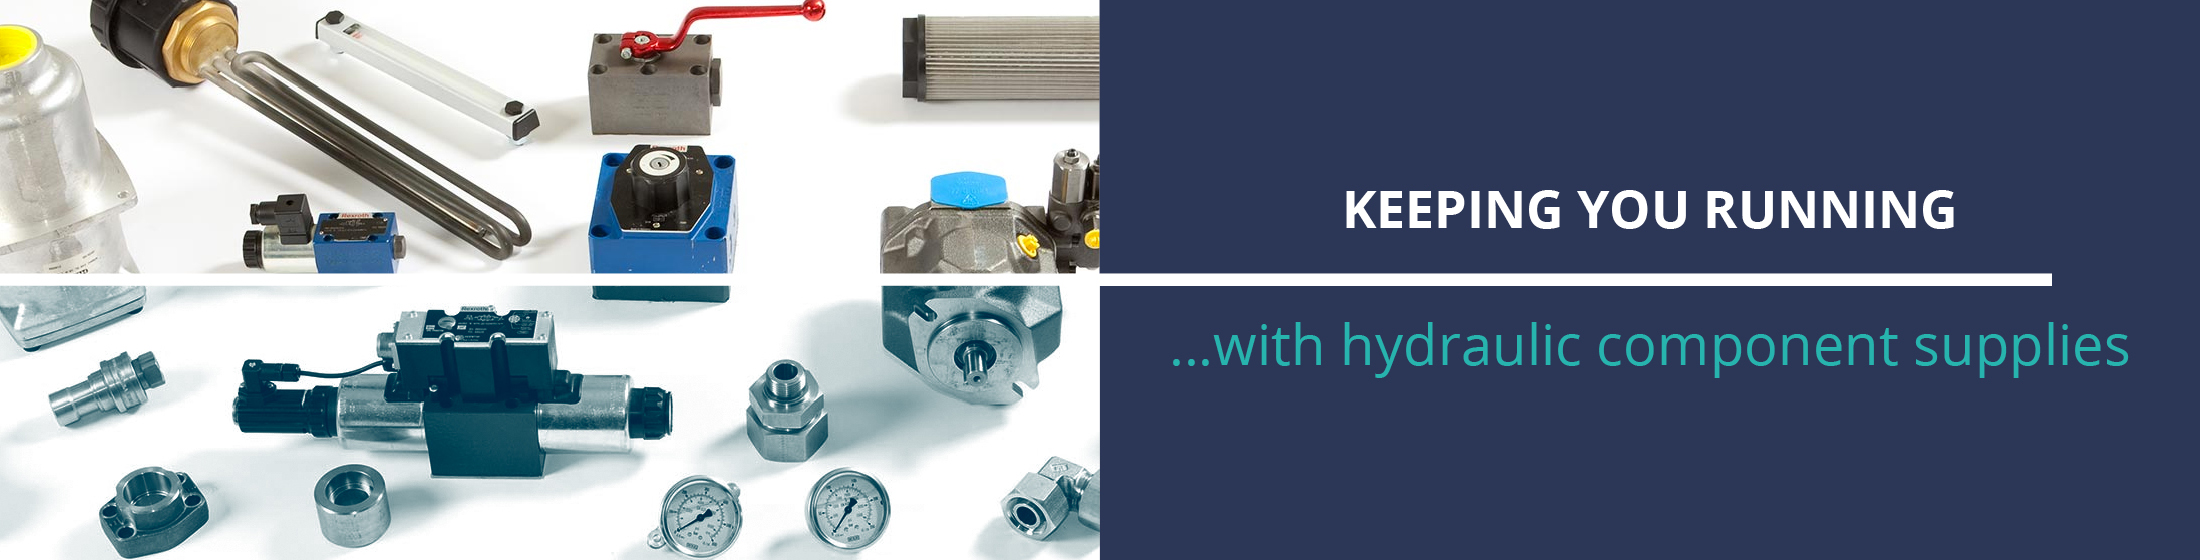 hydraulic fittings, components and supplies